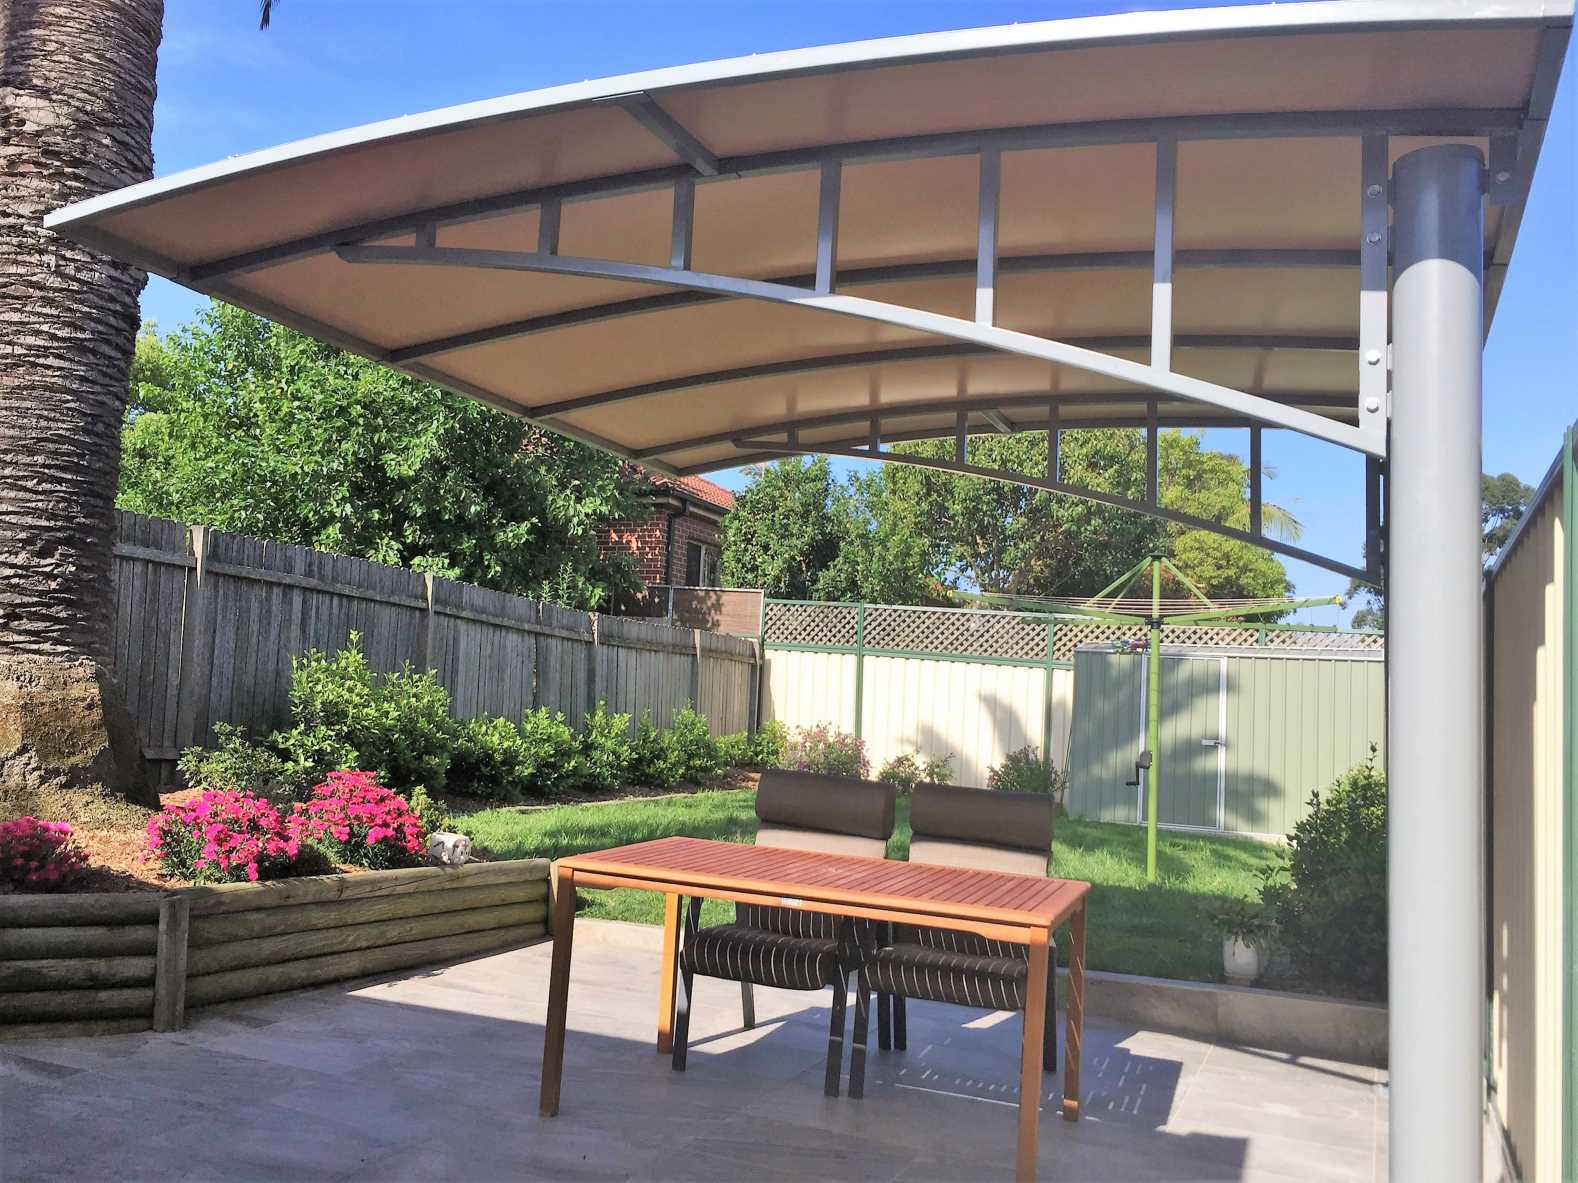 Cantilever Structure Sydney Cantilever Shade Structures Sydney